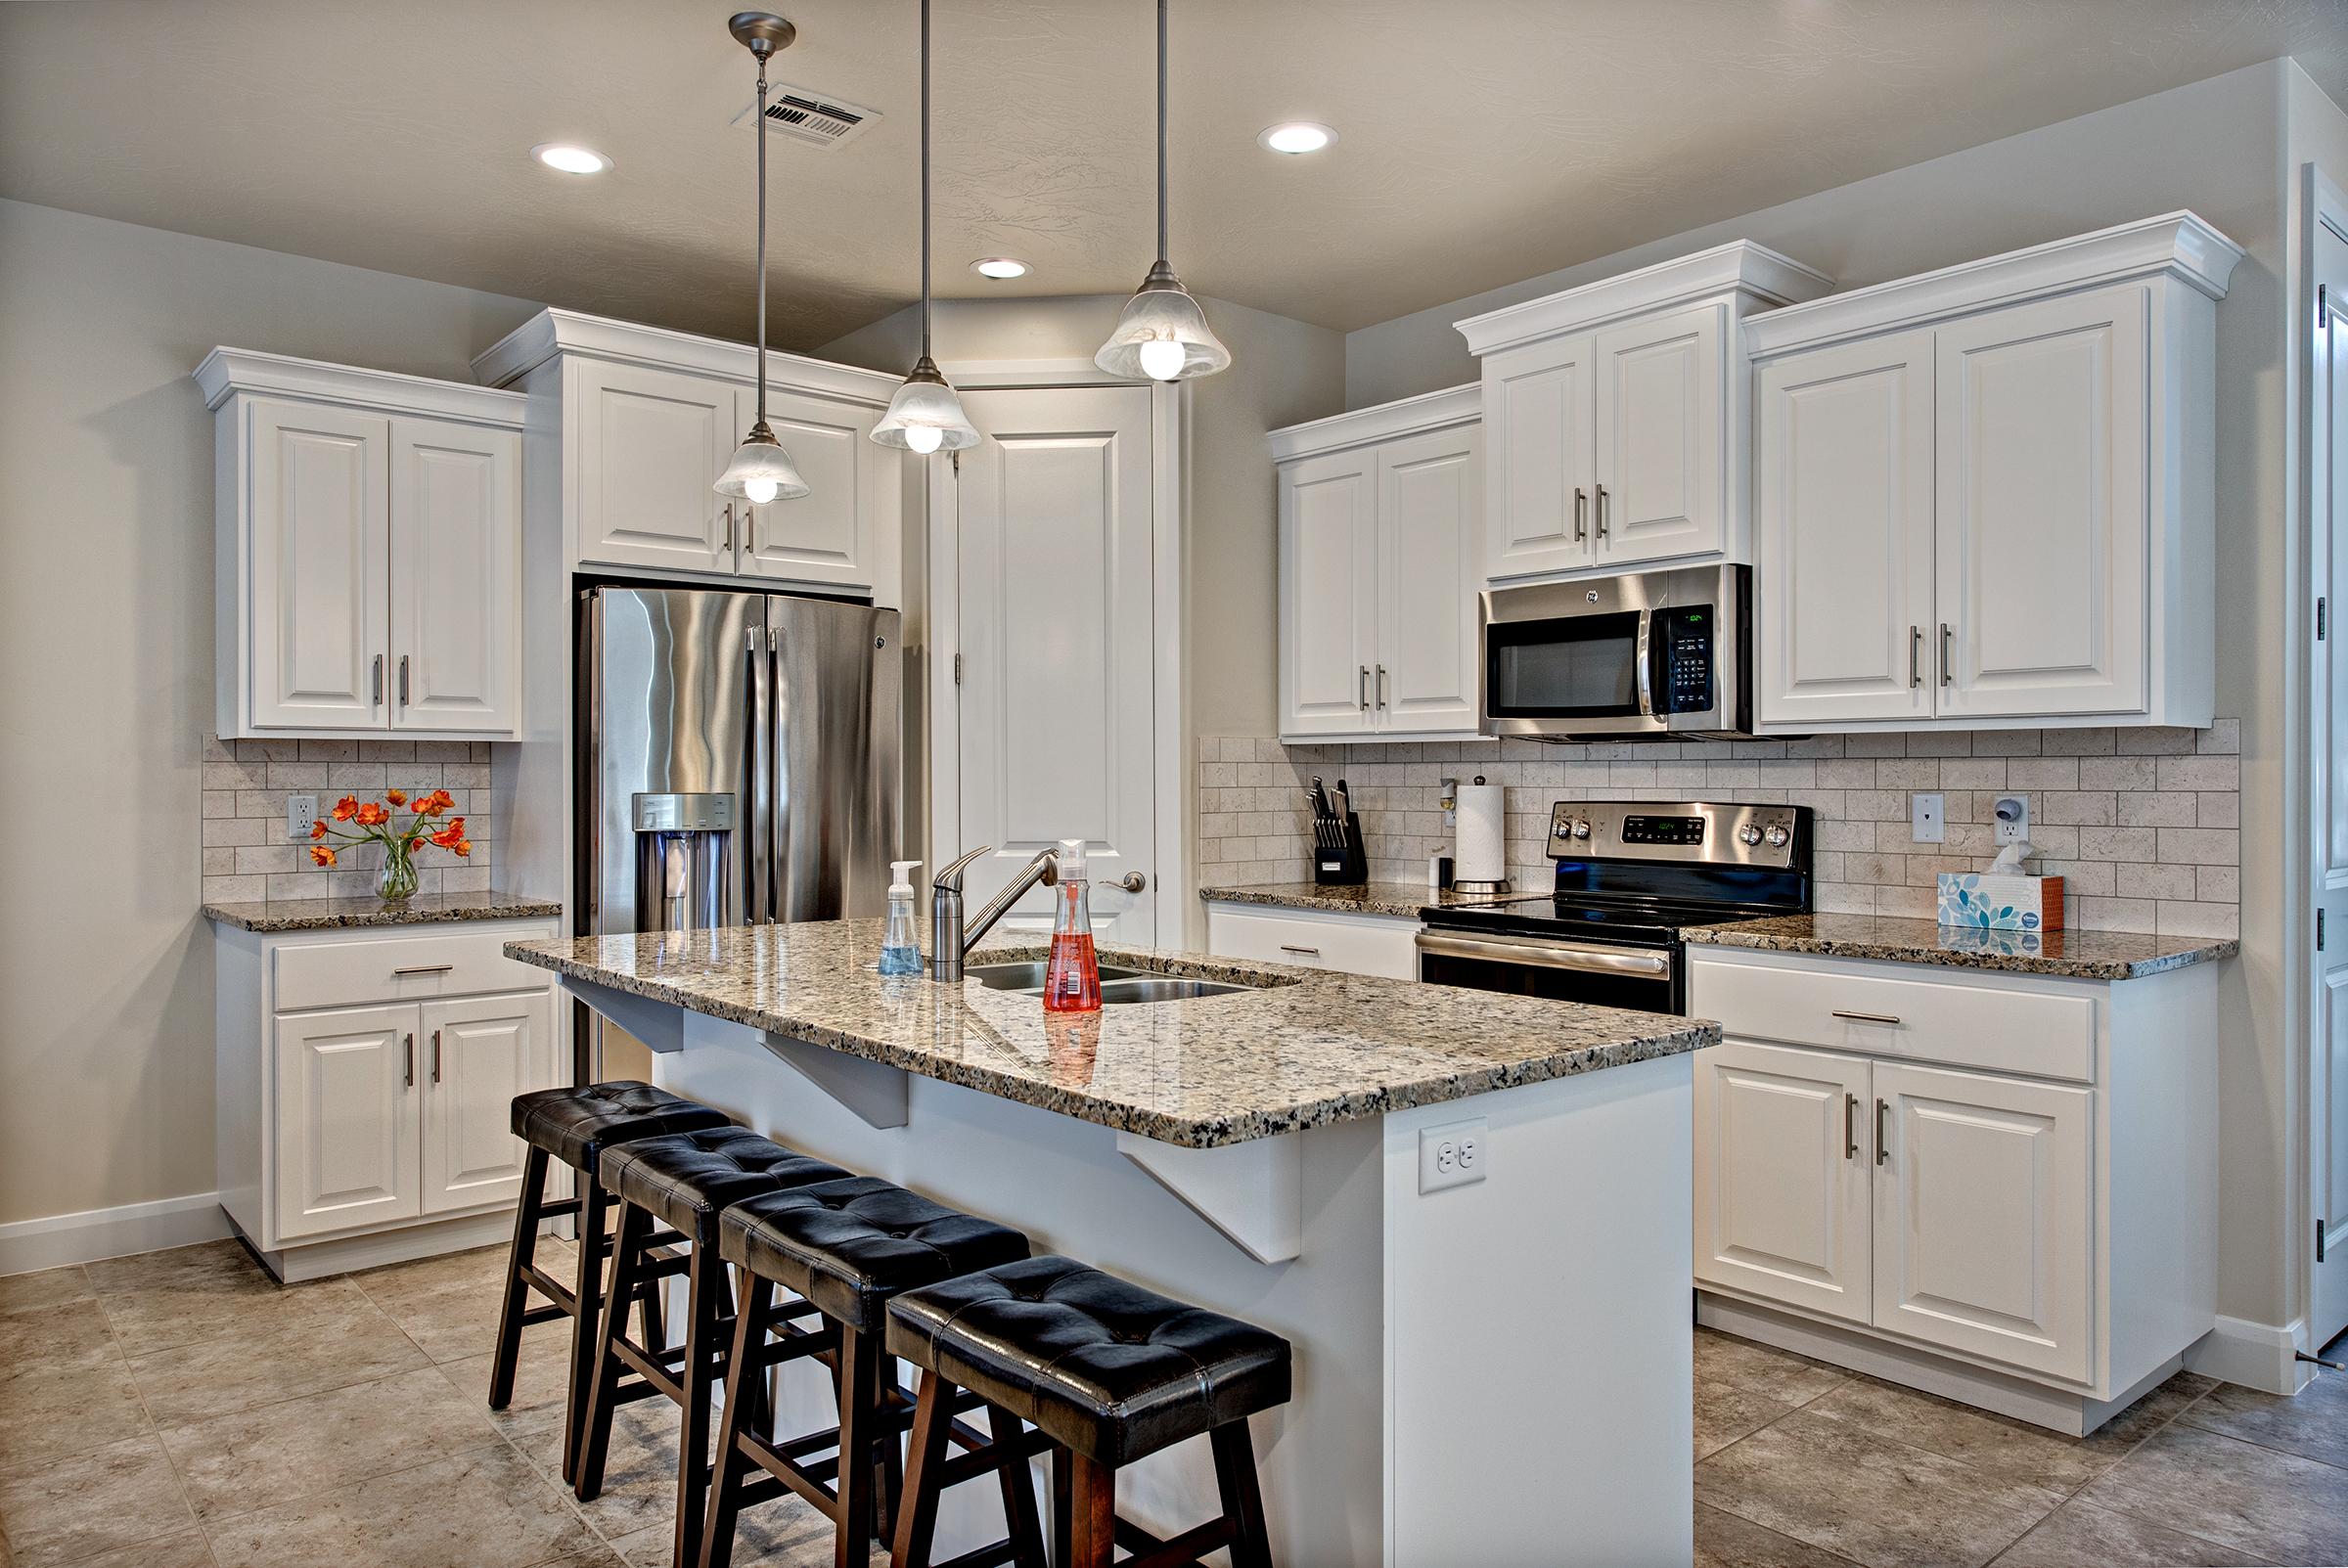 The Kitchen includes stainless steel appliances, granite countertops, walk-in pantry, and plenty of counter space for meal preparations.